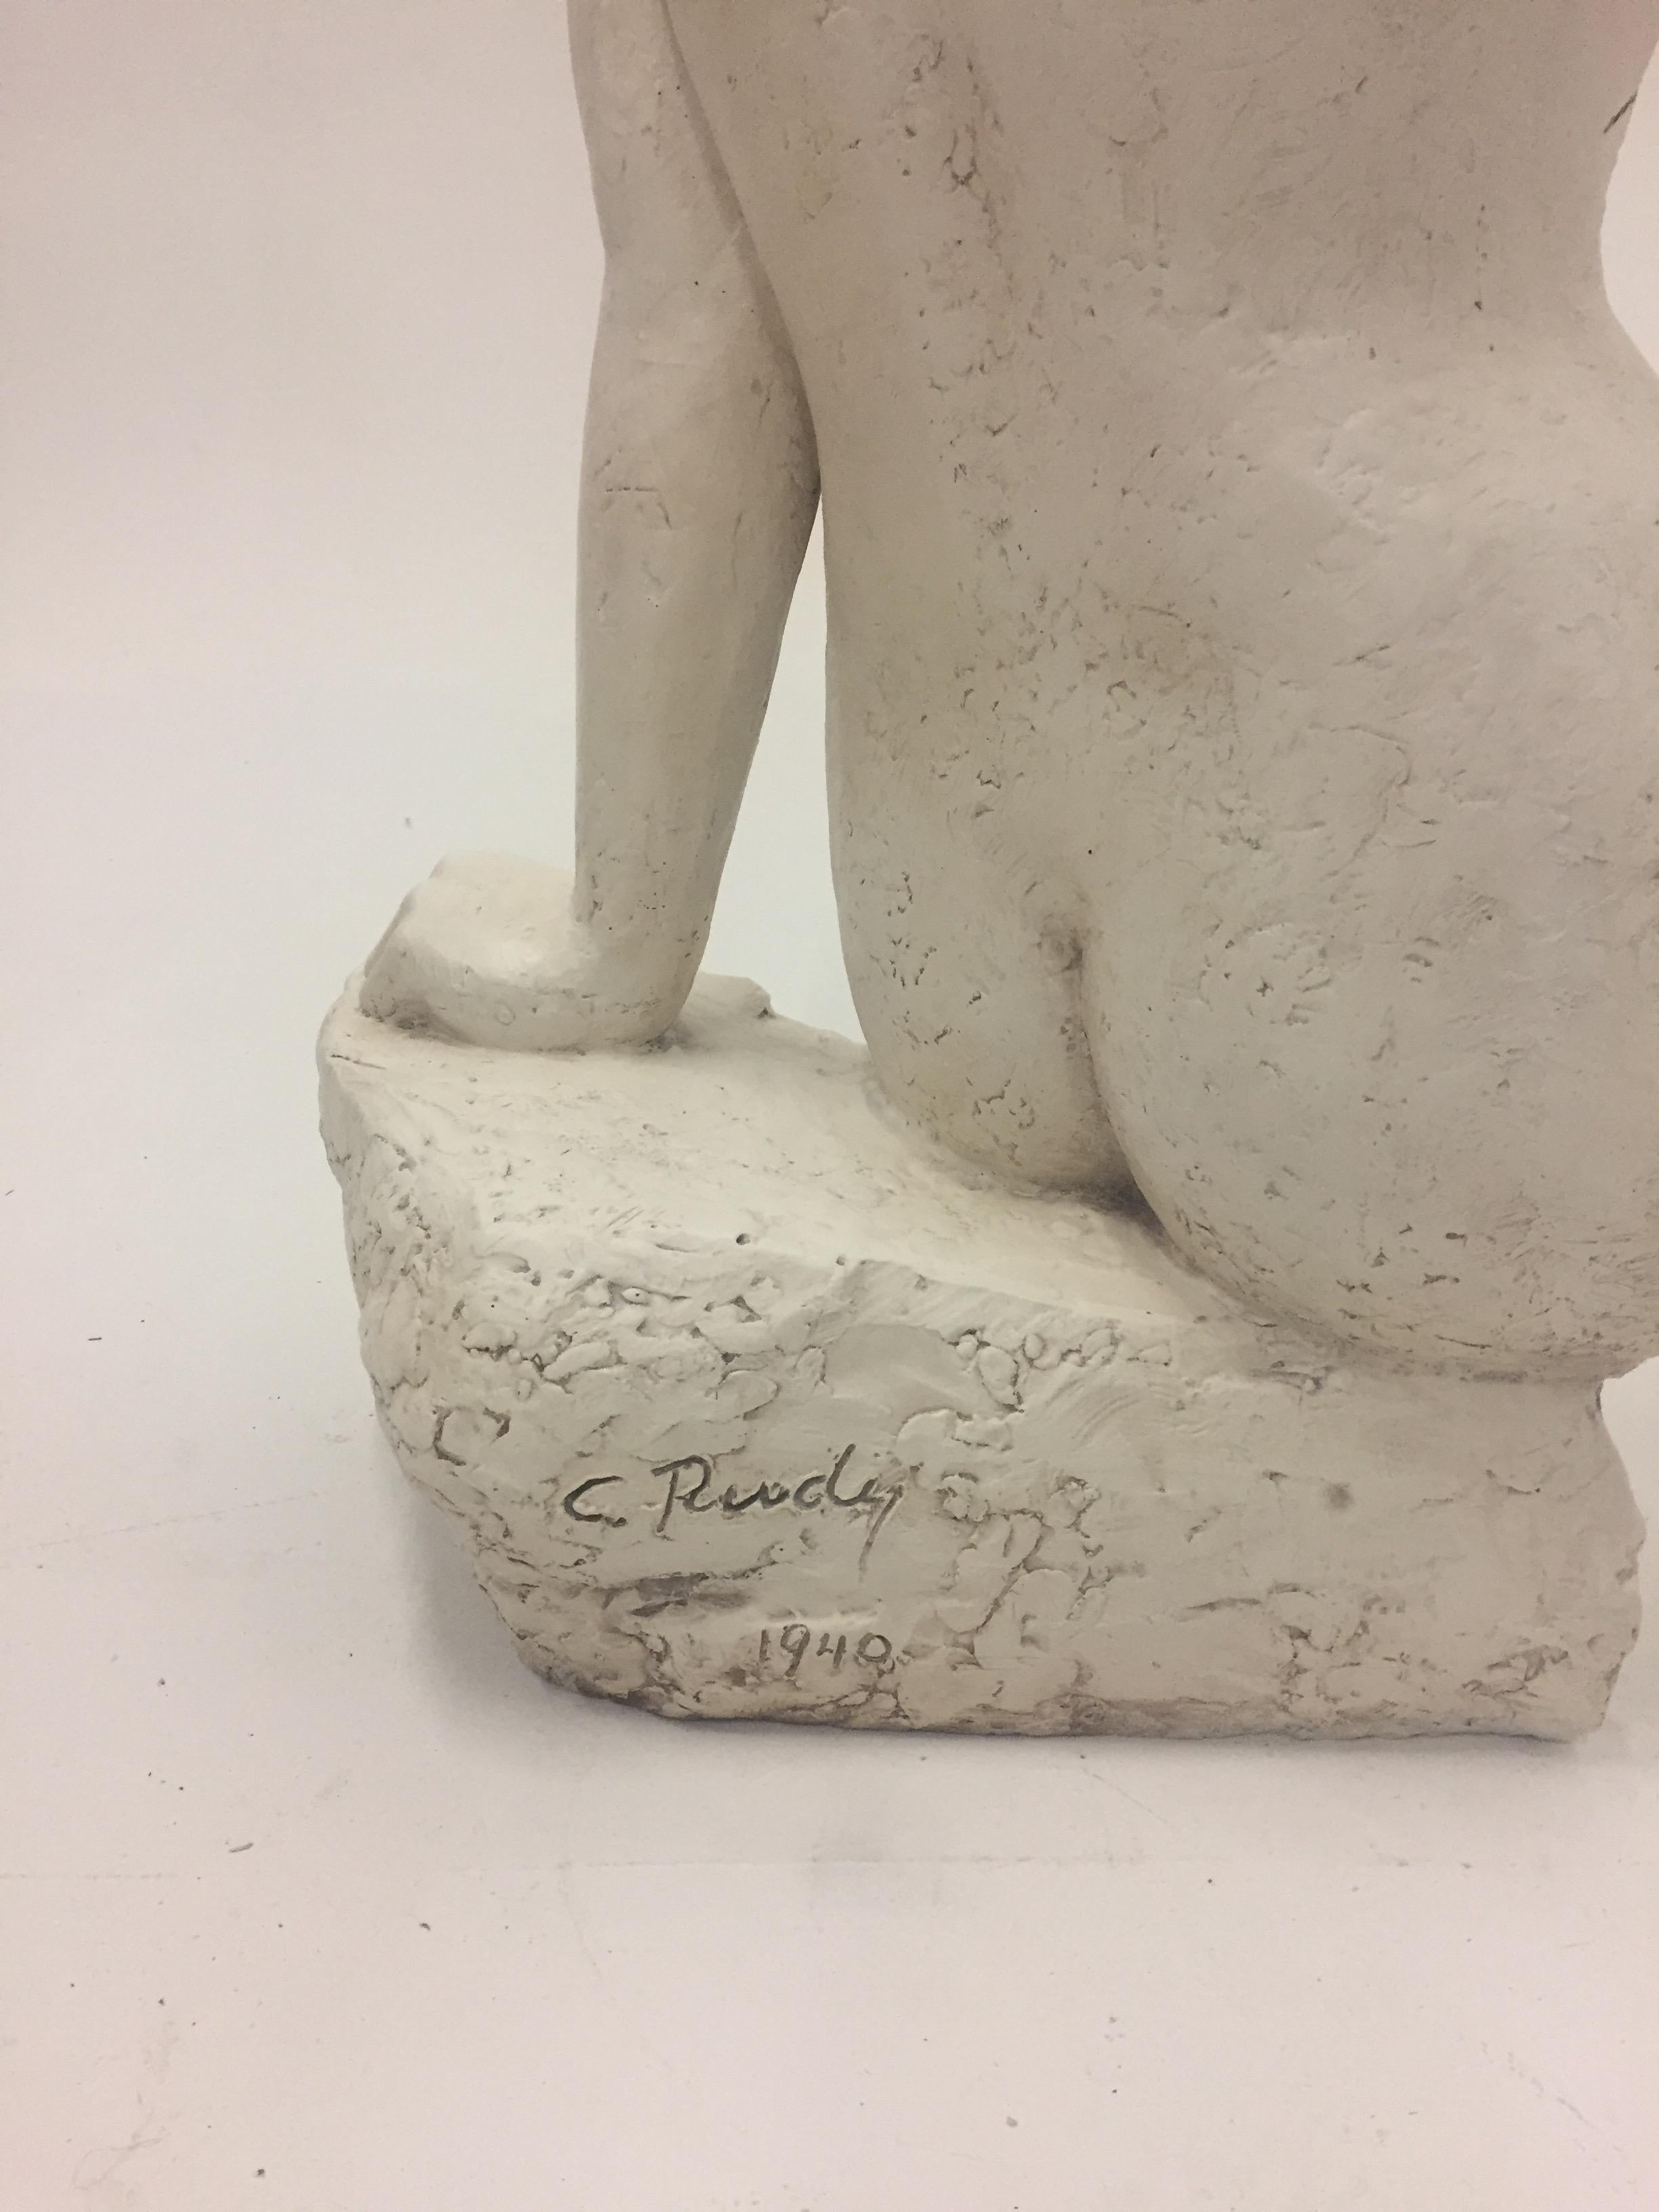 Plaster Sensual Nude Torso Sculpture by Charles Rudy